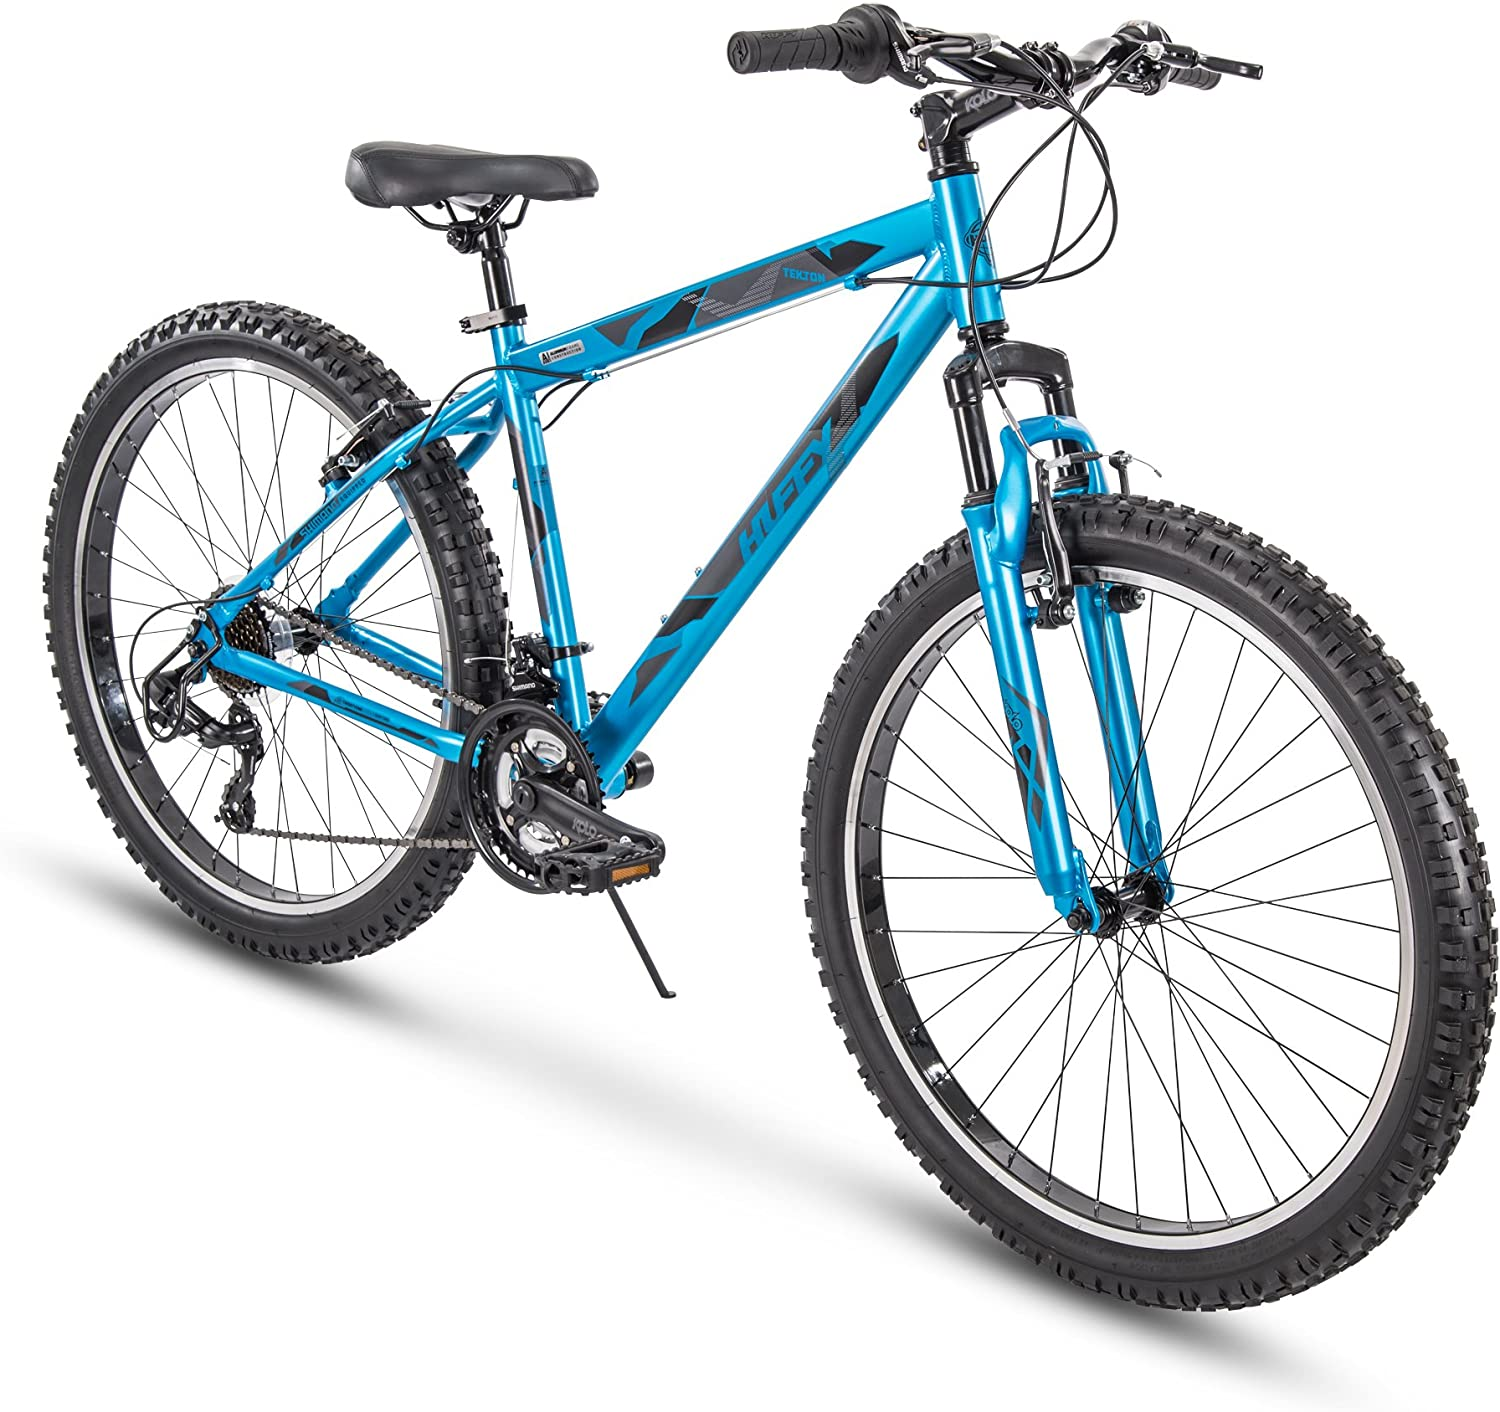 Common mountain bike problems can be avoided by making sure that you choose a mountain bike that is the correct size for you.